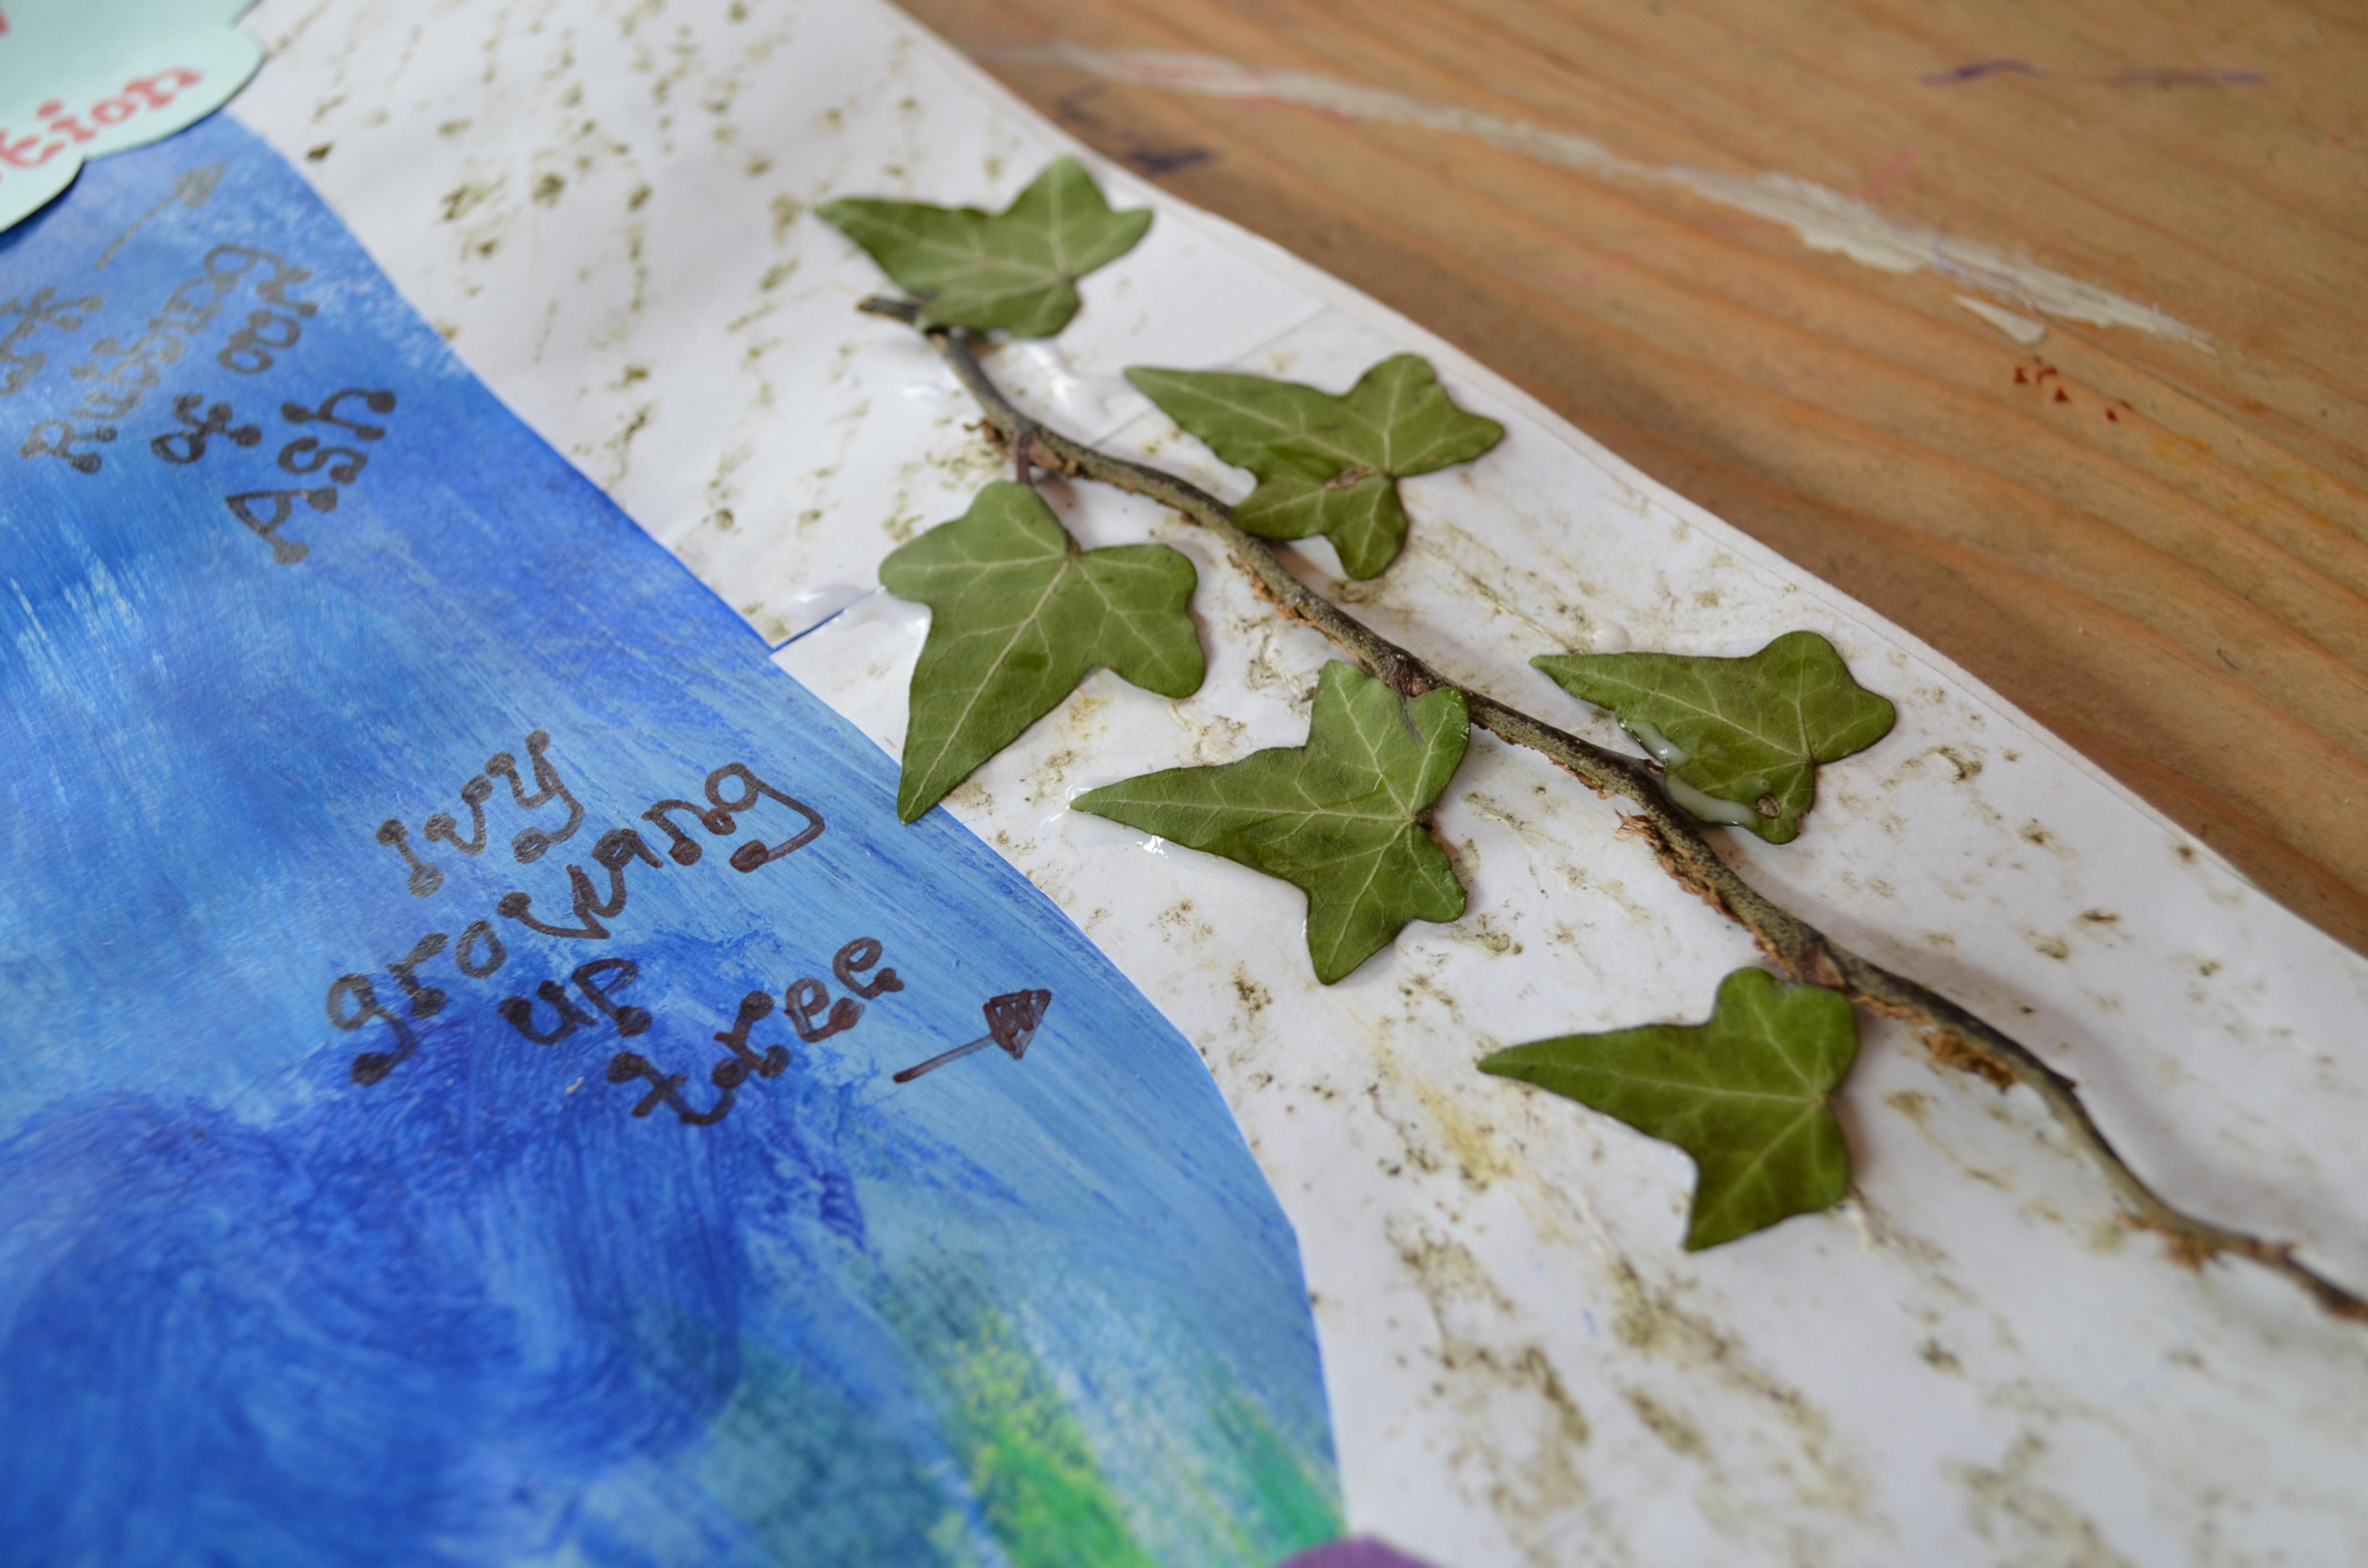 We collected up all the bark rubbings we had taken and cut them into the shape of our Ash tree.  We had dried and pressed the ivy we had collected from the bark of the actual tree and stuck it so it was climbing up the bark rubbing tree.  Clever, no?!